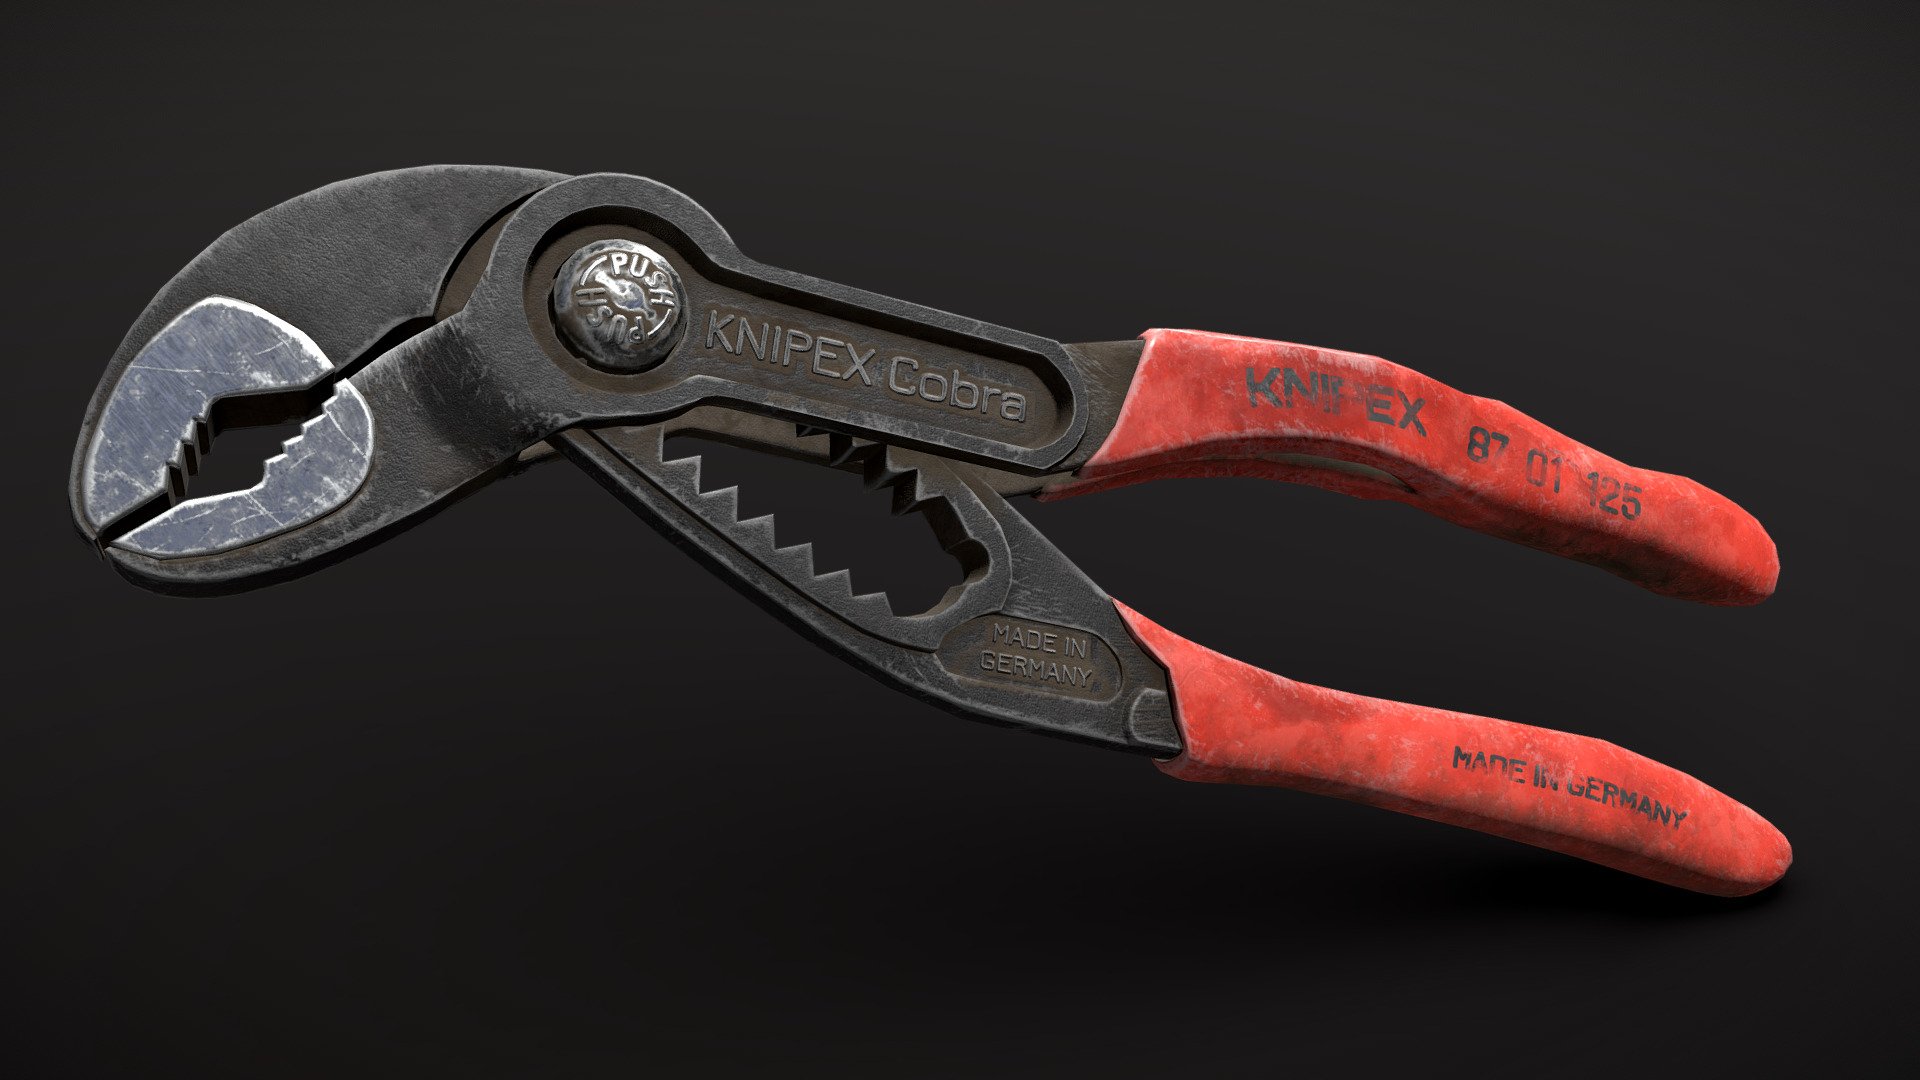 A pair of pliers made as part of an assignment at DAE howest.
We had 3 weeks to model a lowpoly and a highpoly in maya and bake and texture in Substance Painter 3d model